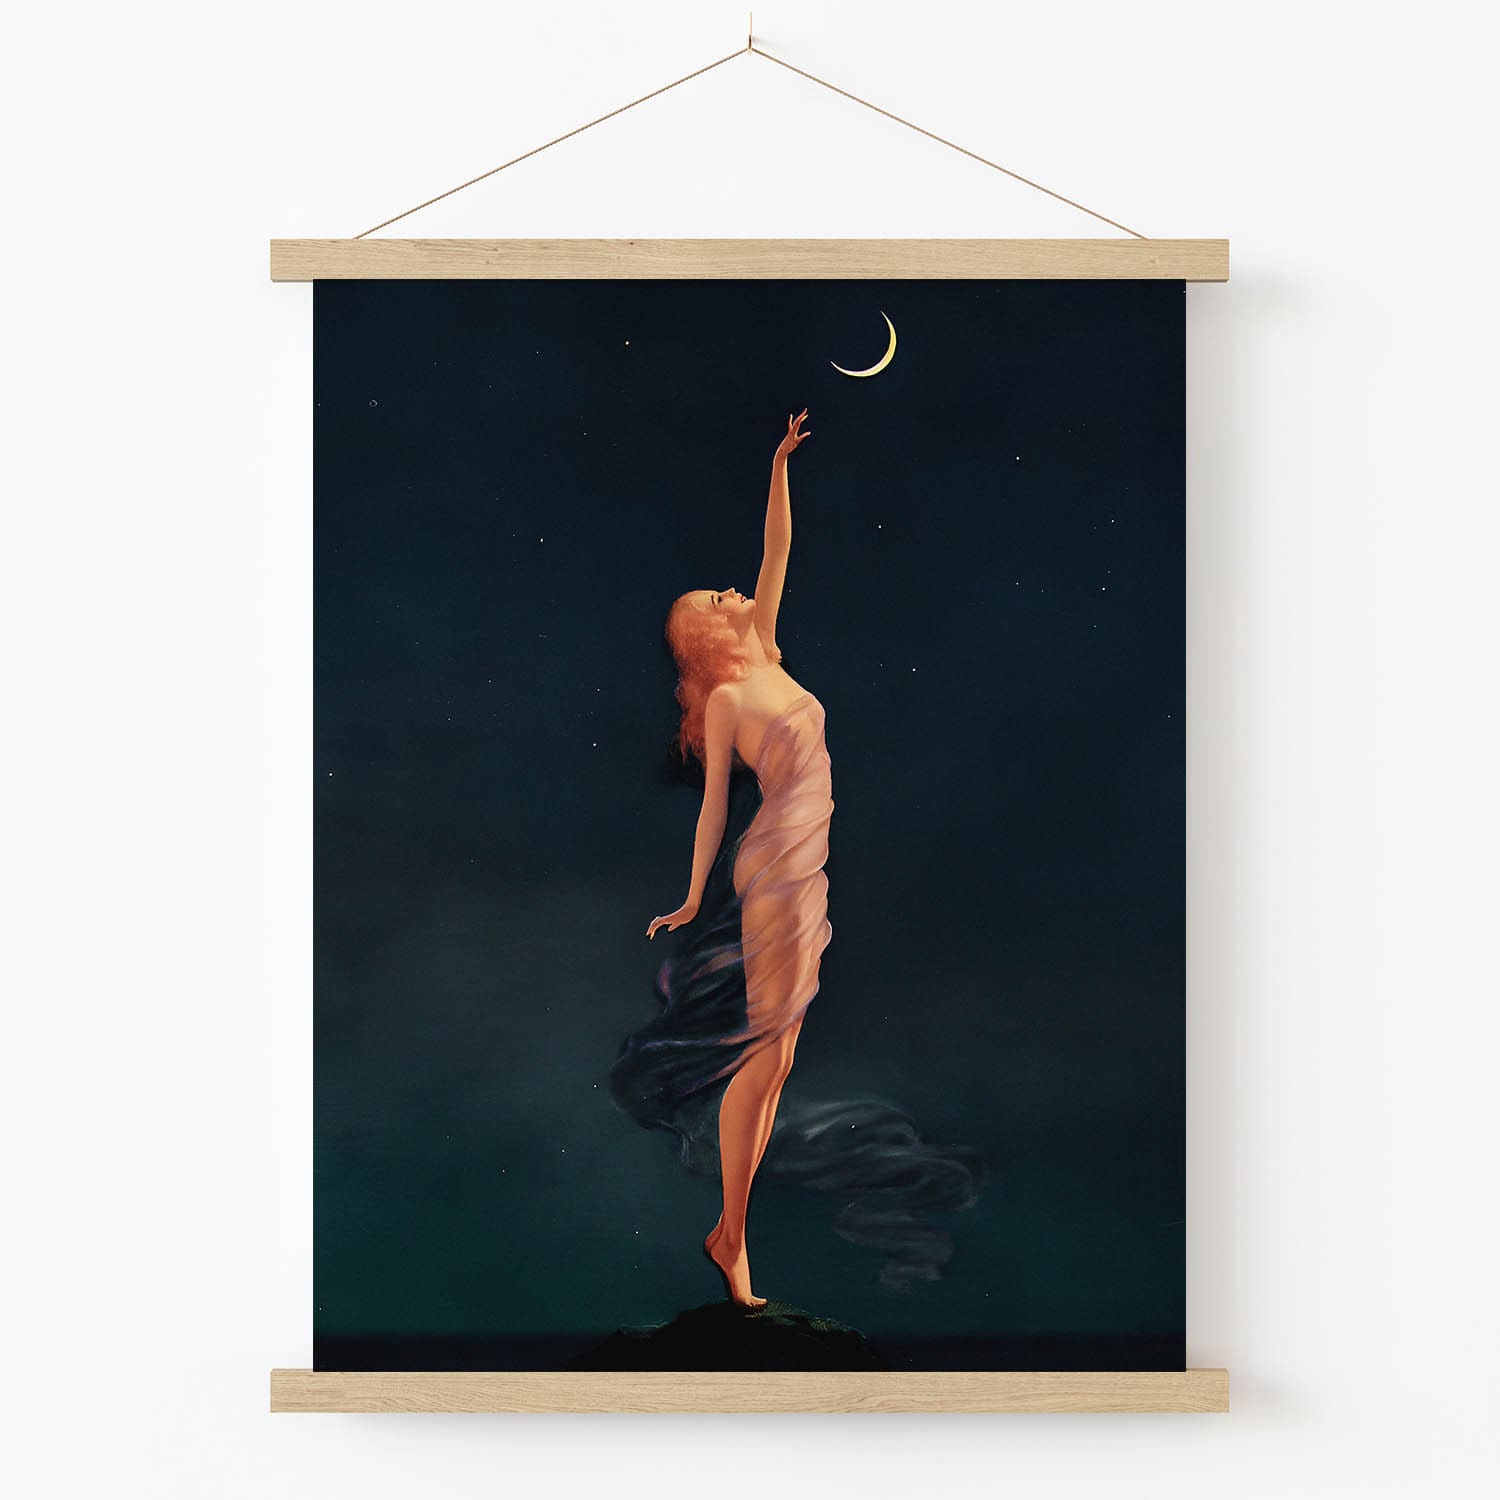 Woman in a Sheer Dress Reaching to a Crescent Moon Art Print in Wood Hanger Frame on Wall